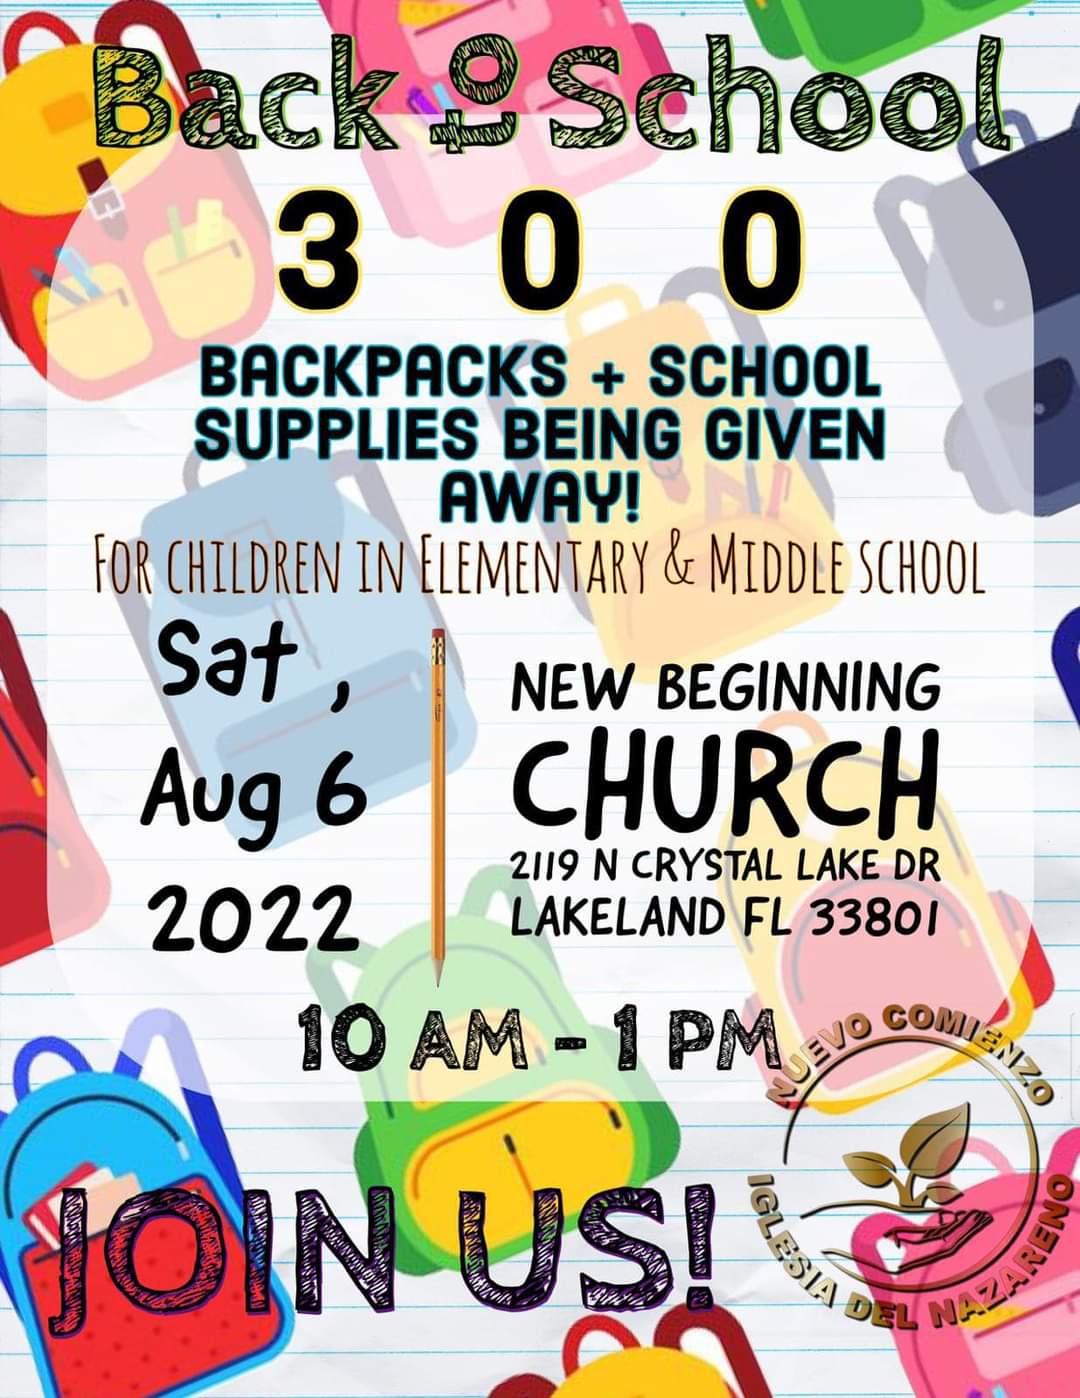 back to school. 300 backpacks and school supplies to be given away. elementary and middle school children.  8-6-22 10a-1p, new beginning church, 2119 n crystal lake dr, join us.